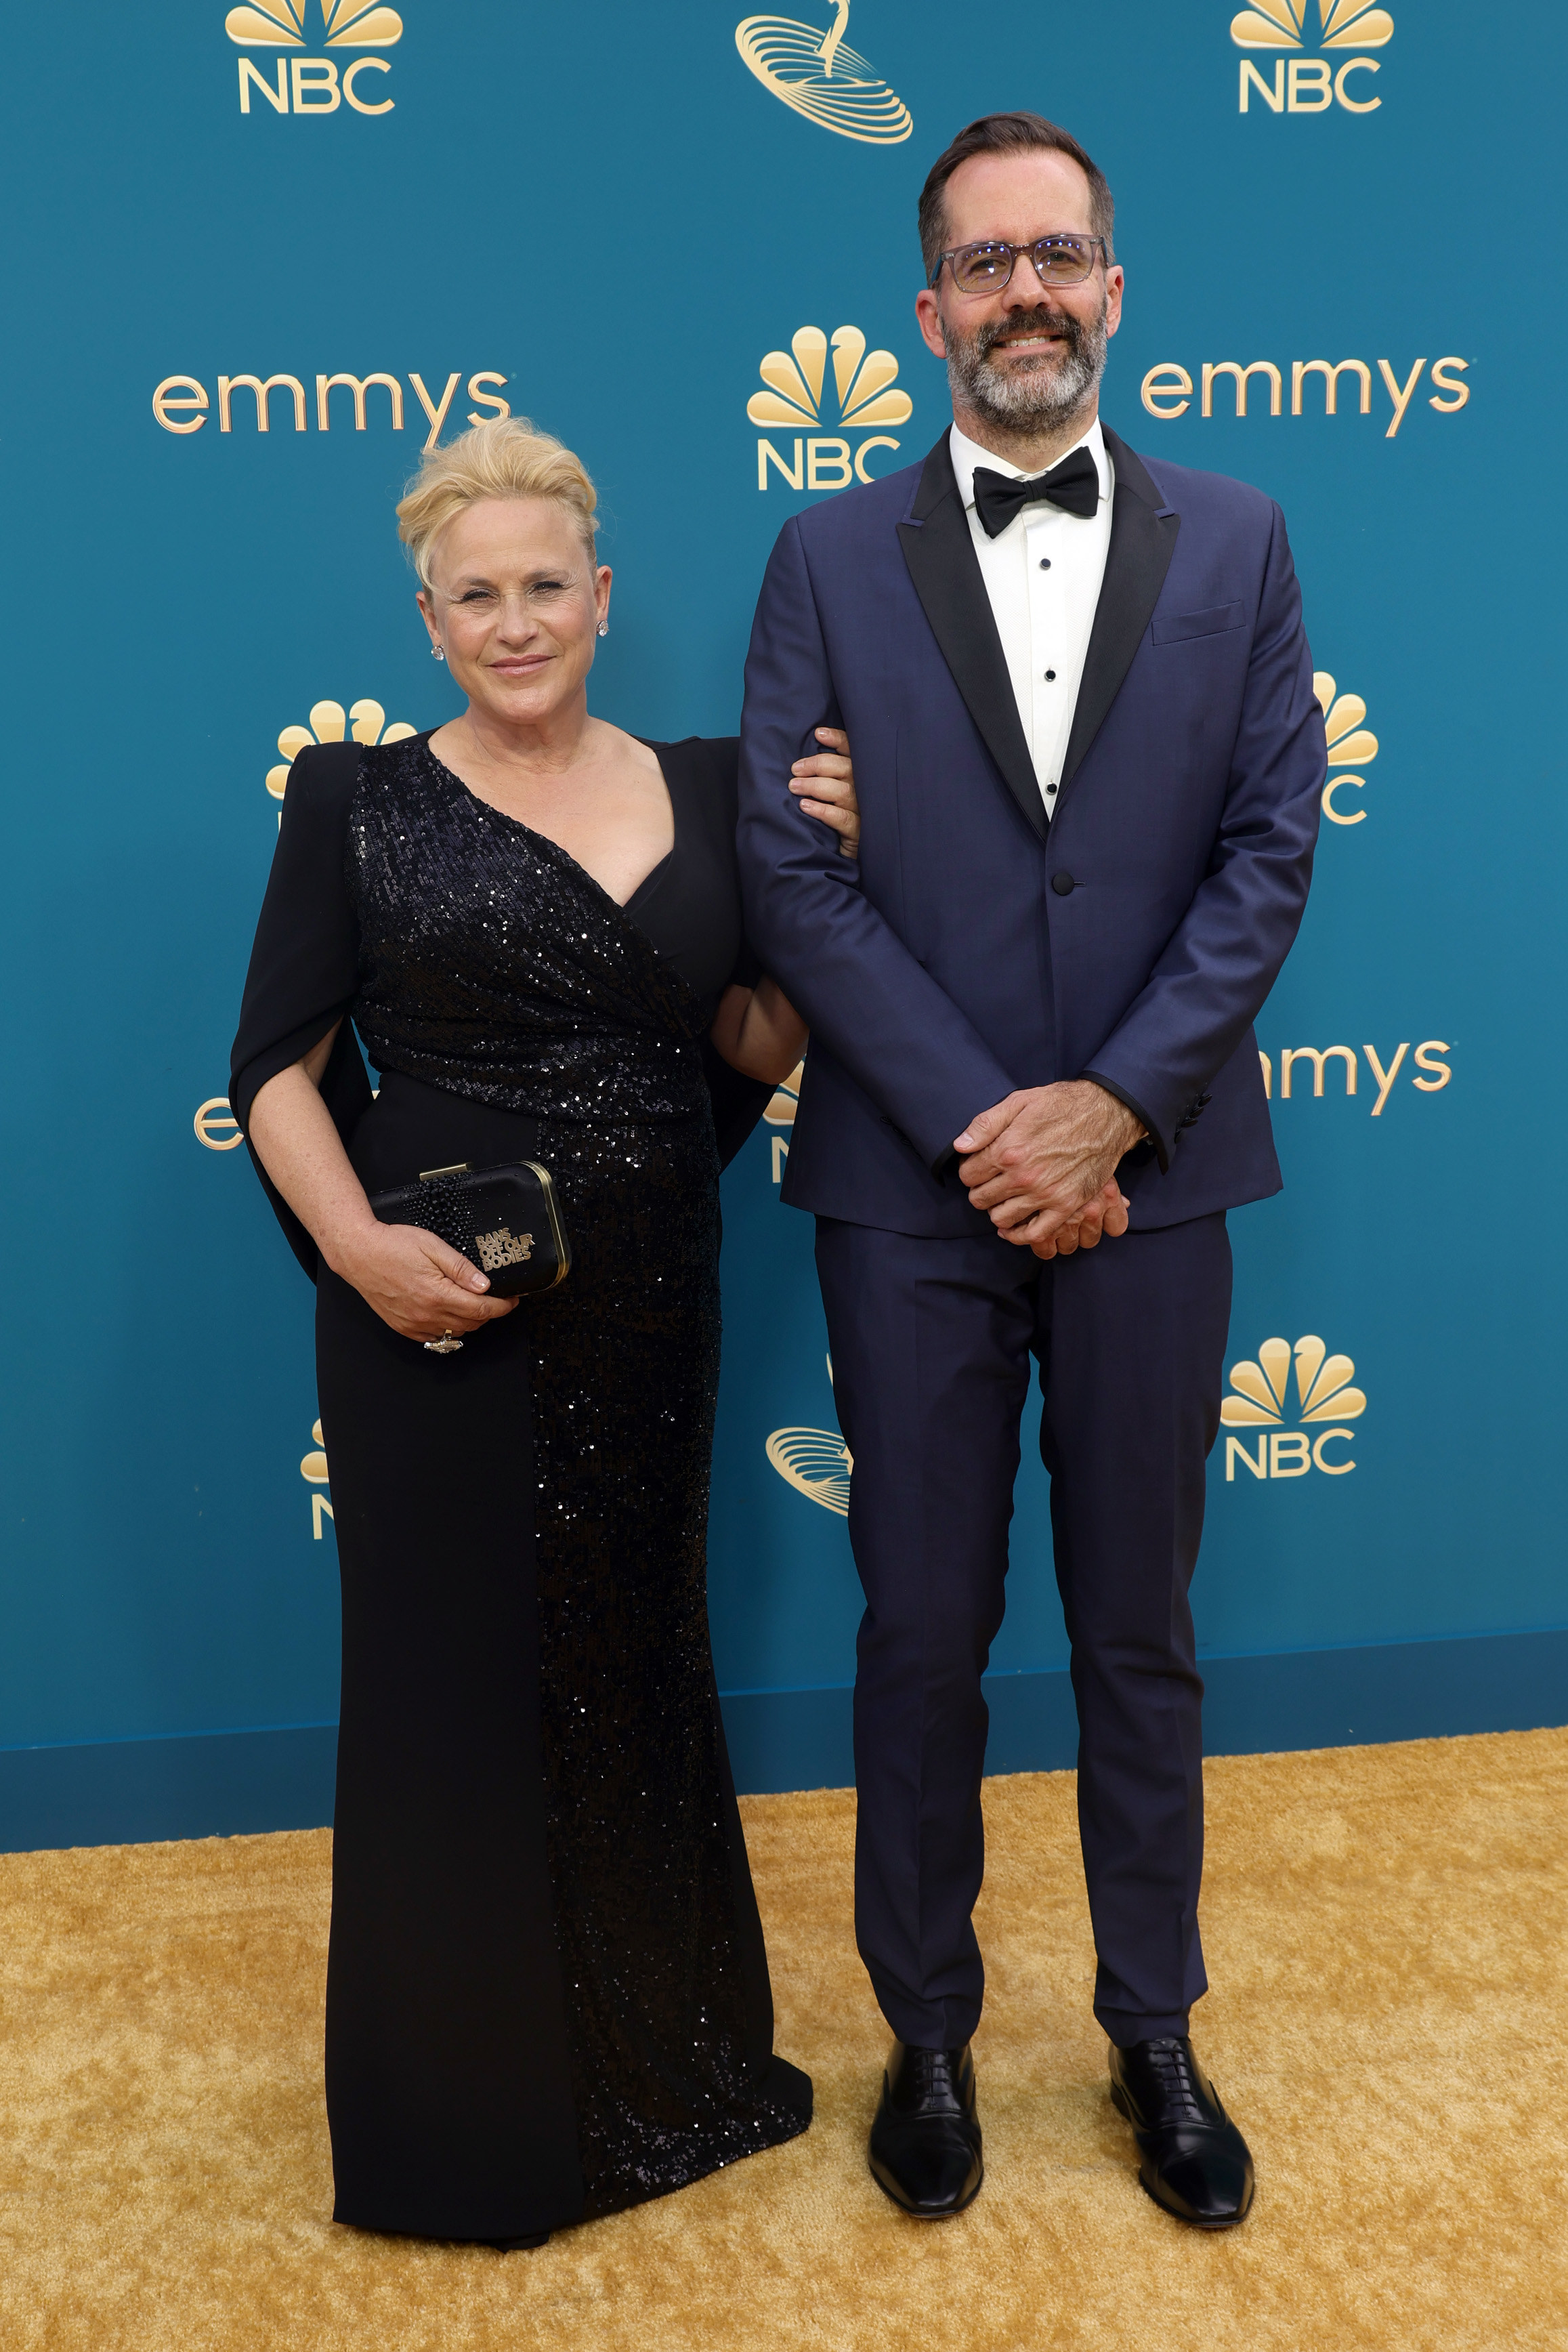 Patricia Arquette and Eric White standing together